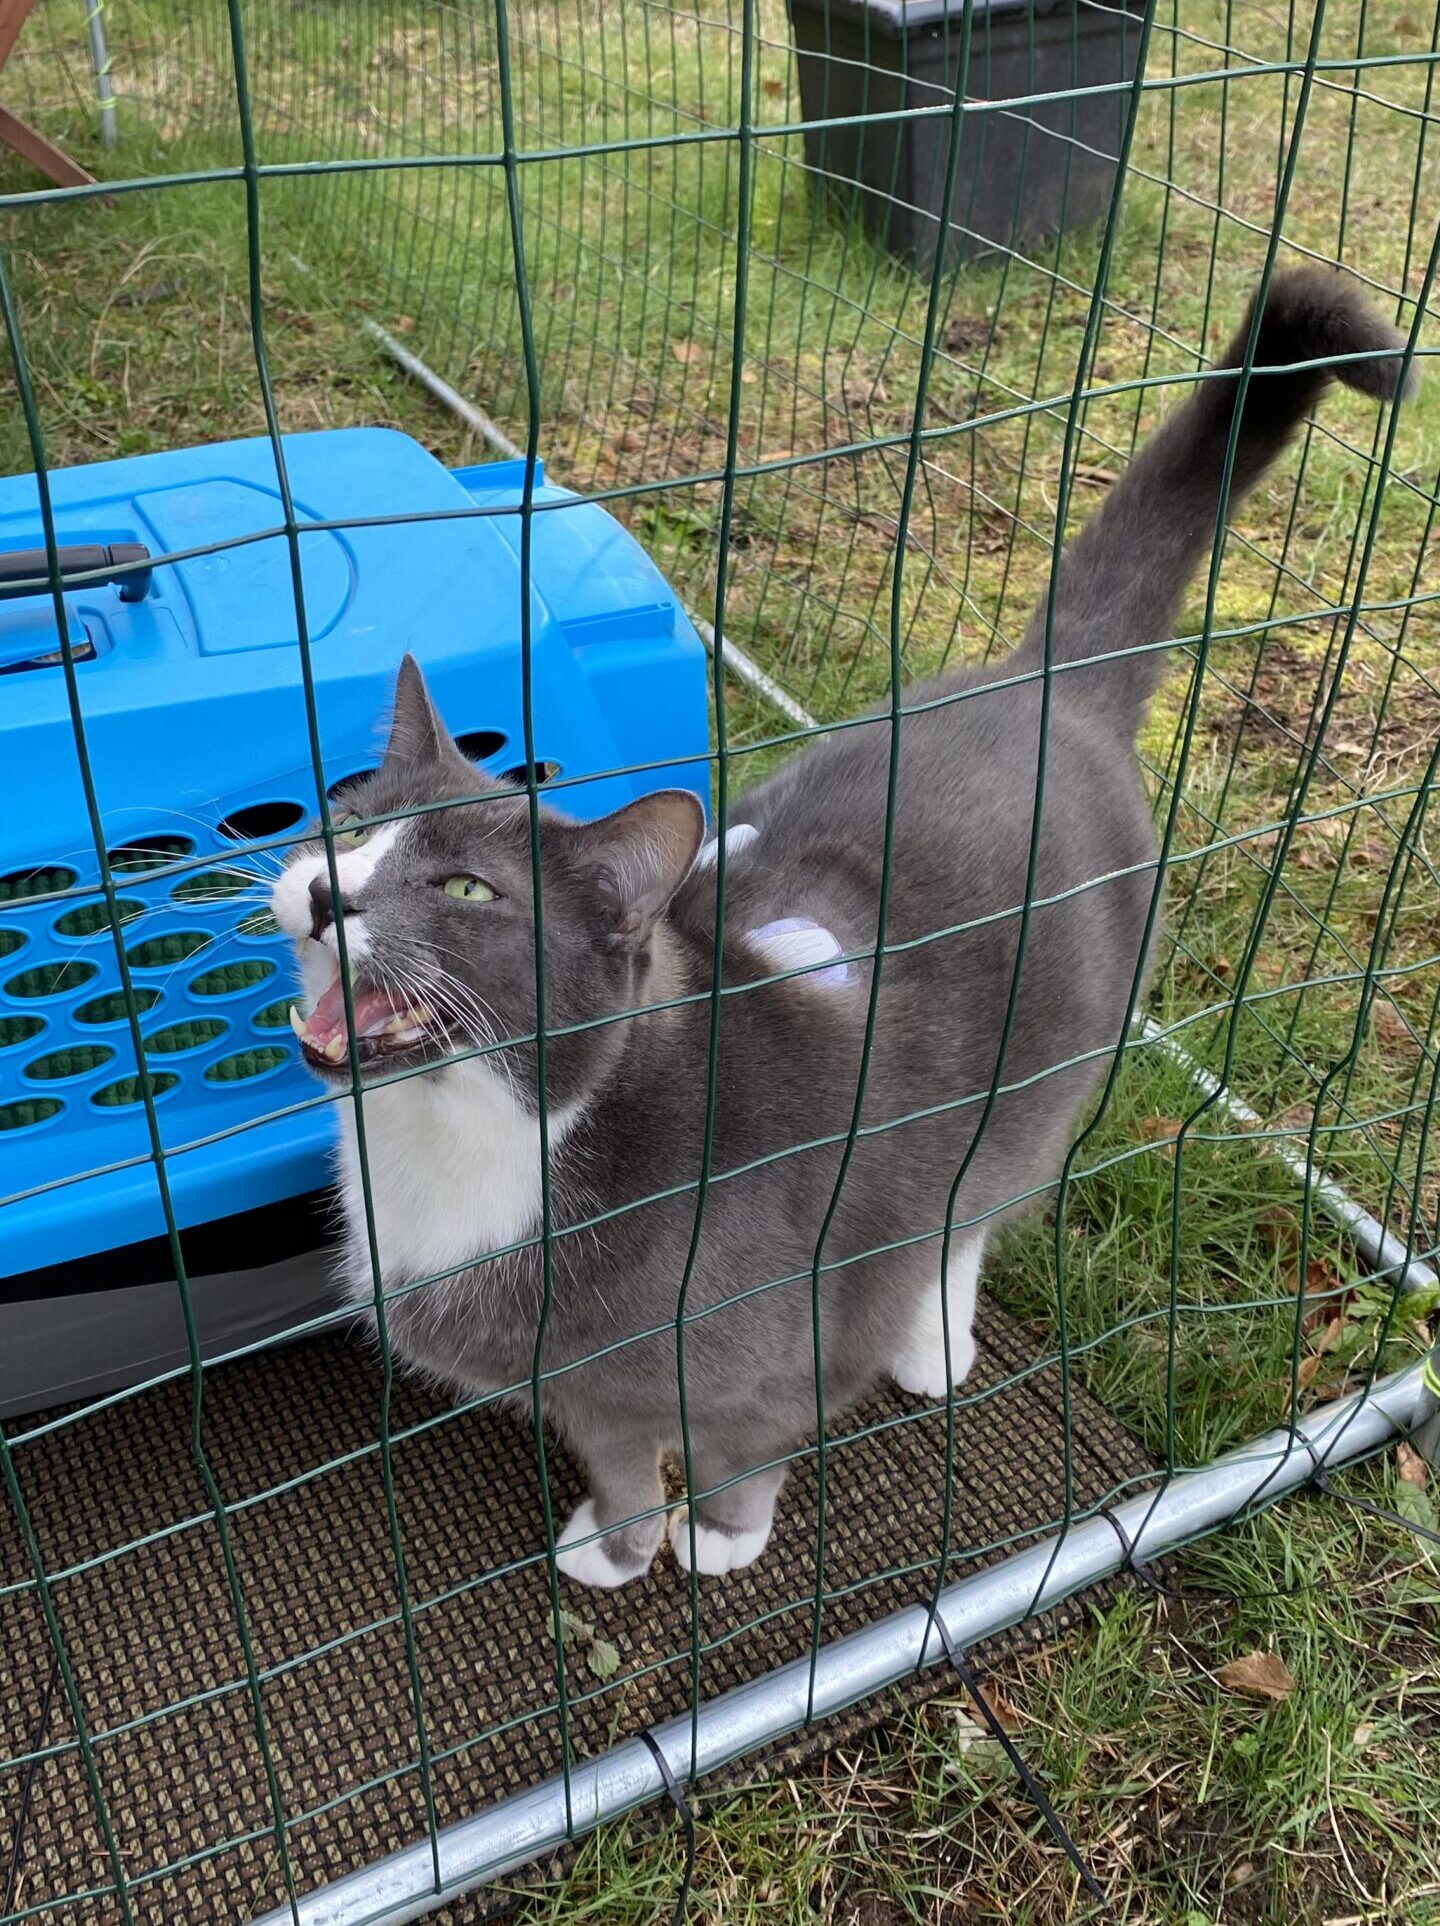 Grey cat in an outside enclosure - a "Catio", meouwing. Cat has a Continuous Blood Glucose monitor and an Omnipod insulin pump.